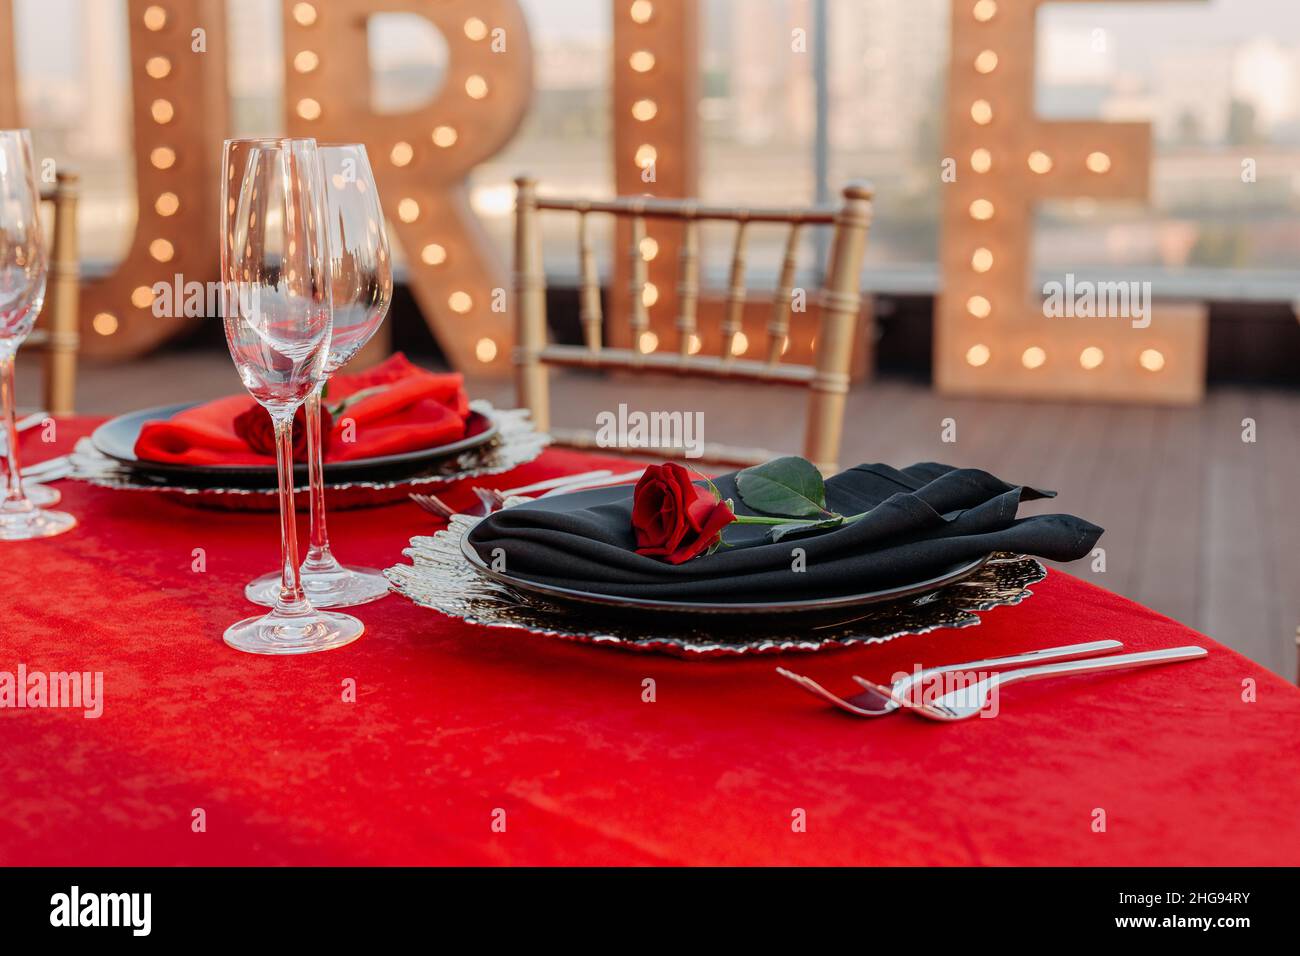 Guests table setting for banquet in black, red and gold style. Elegant dinner: decor, tablecloth, plates with napkins and fresh roses, glasses, cutlery. Themed party celebration on the roof, outdoor Stock Photo